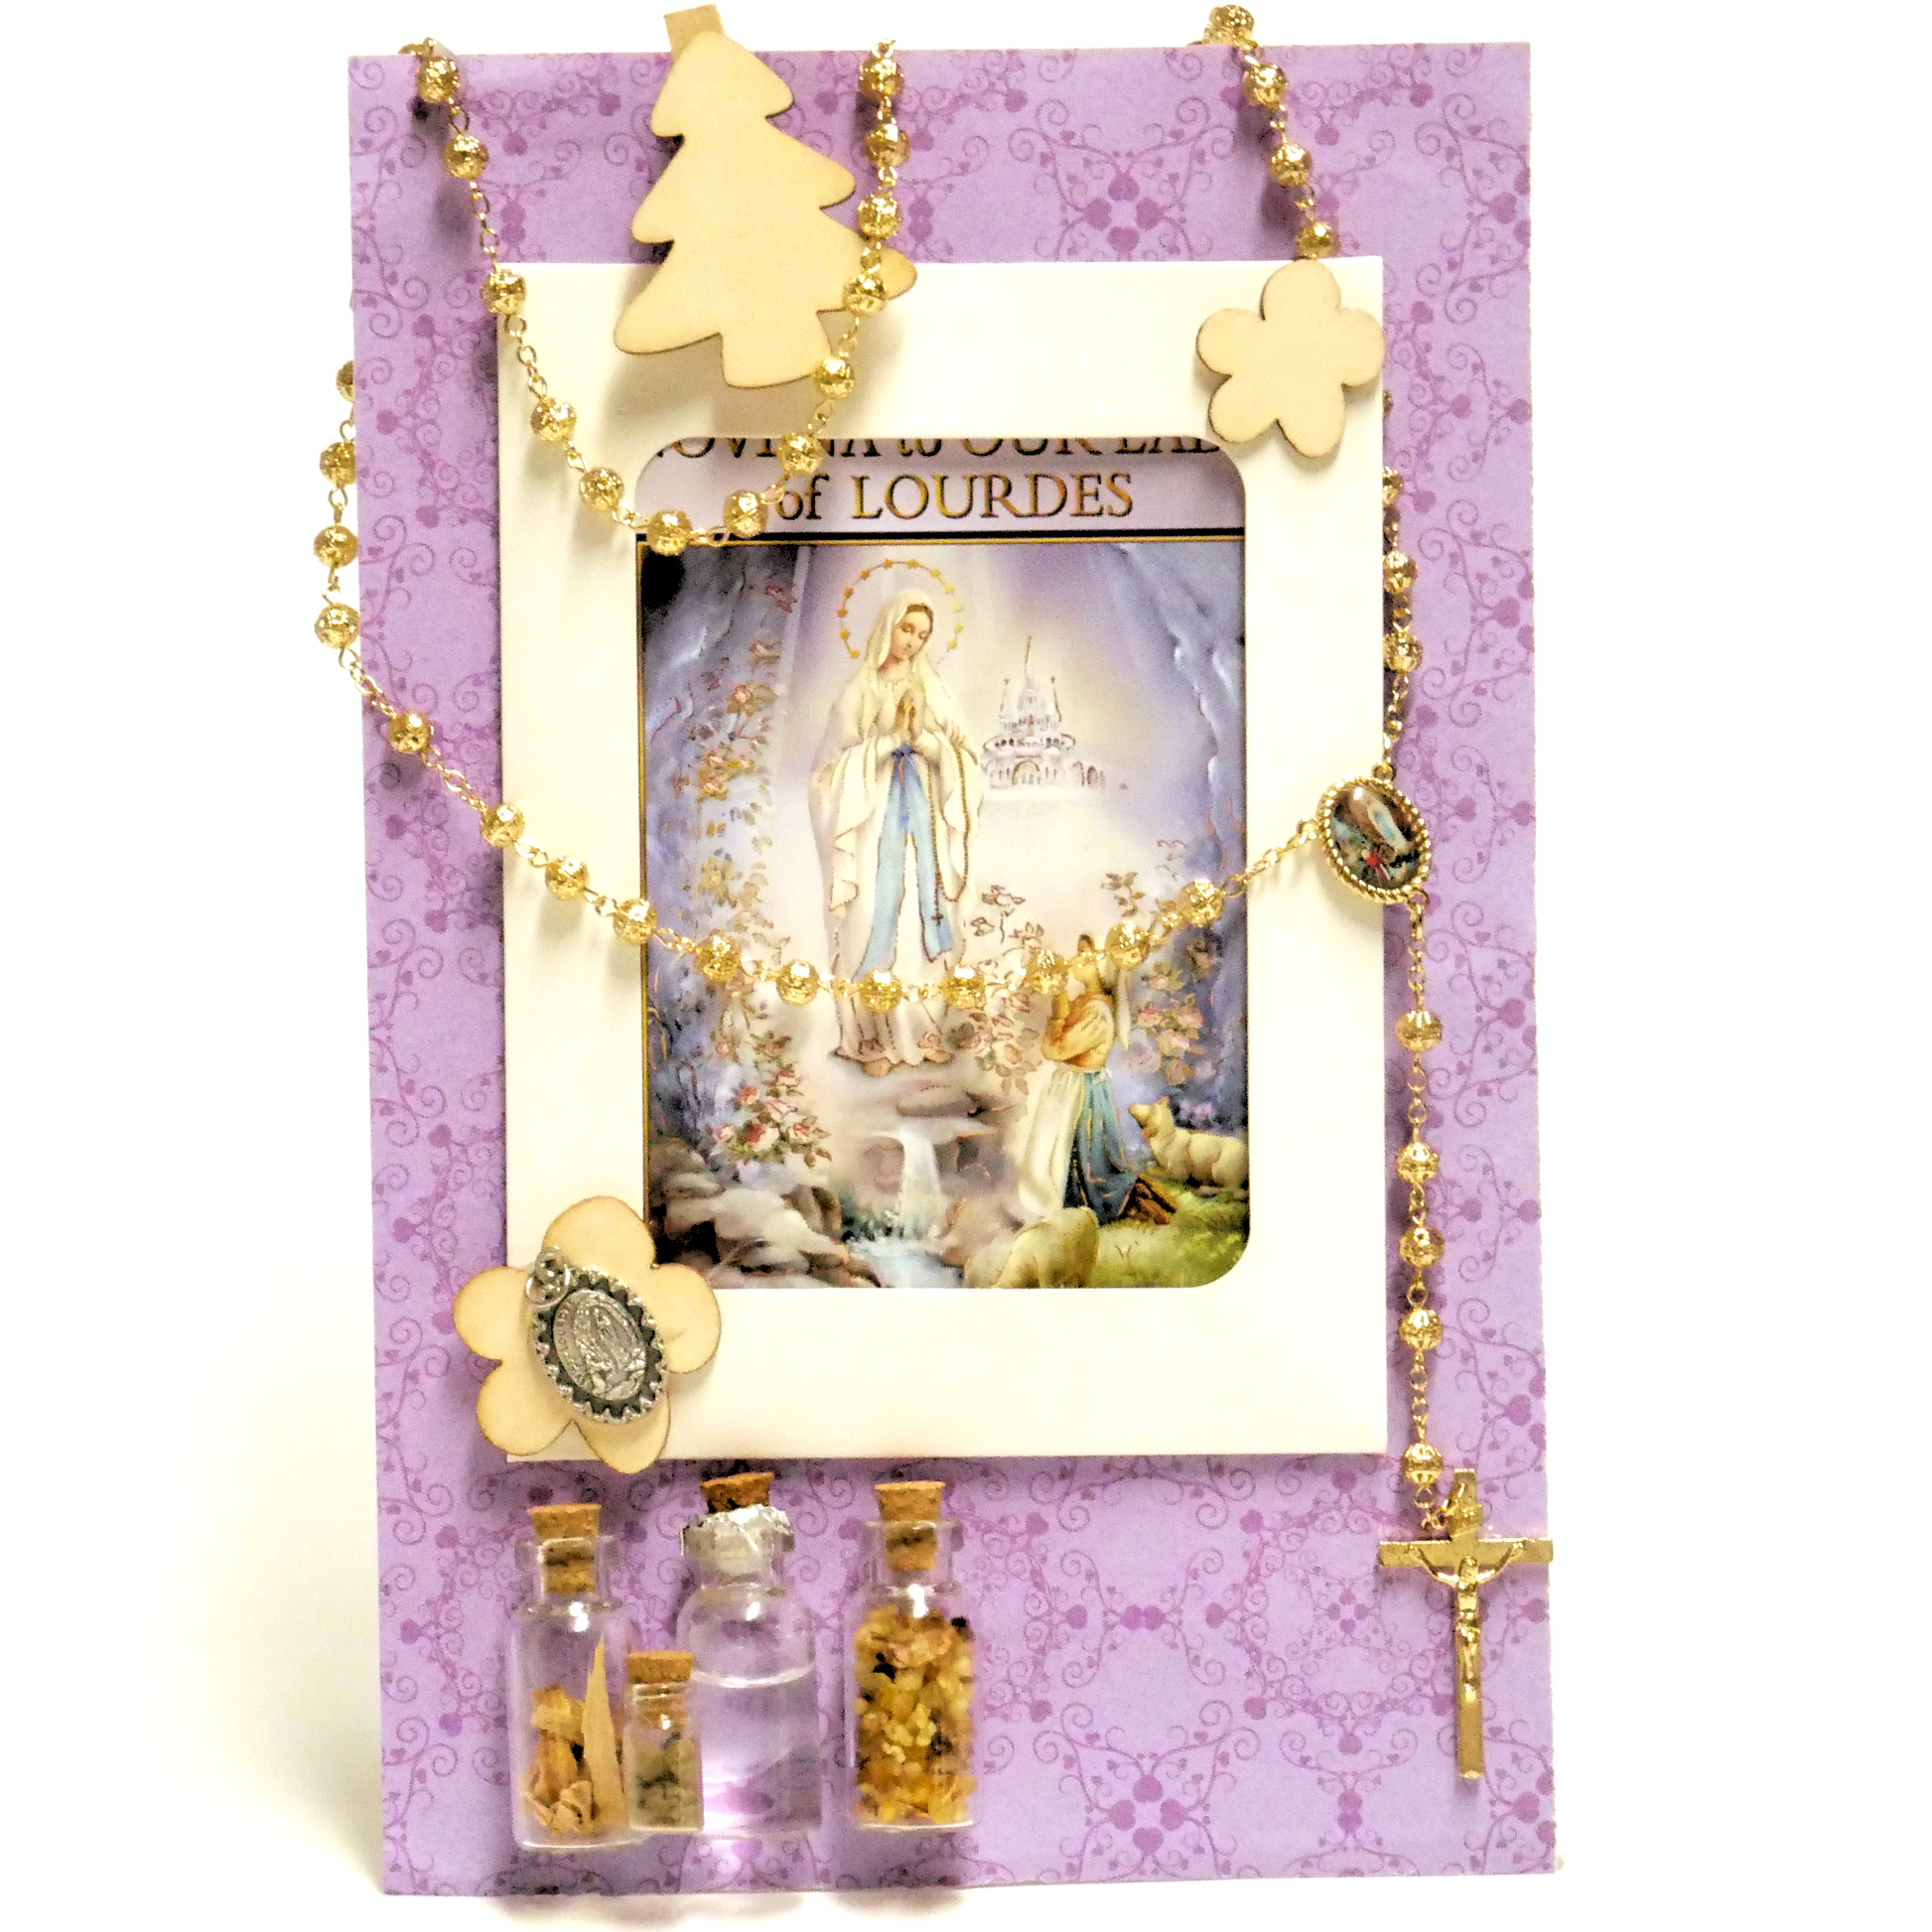 Our Lady of Lourdes Set - Our Lady of Gifts 